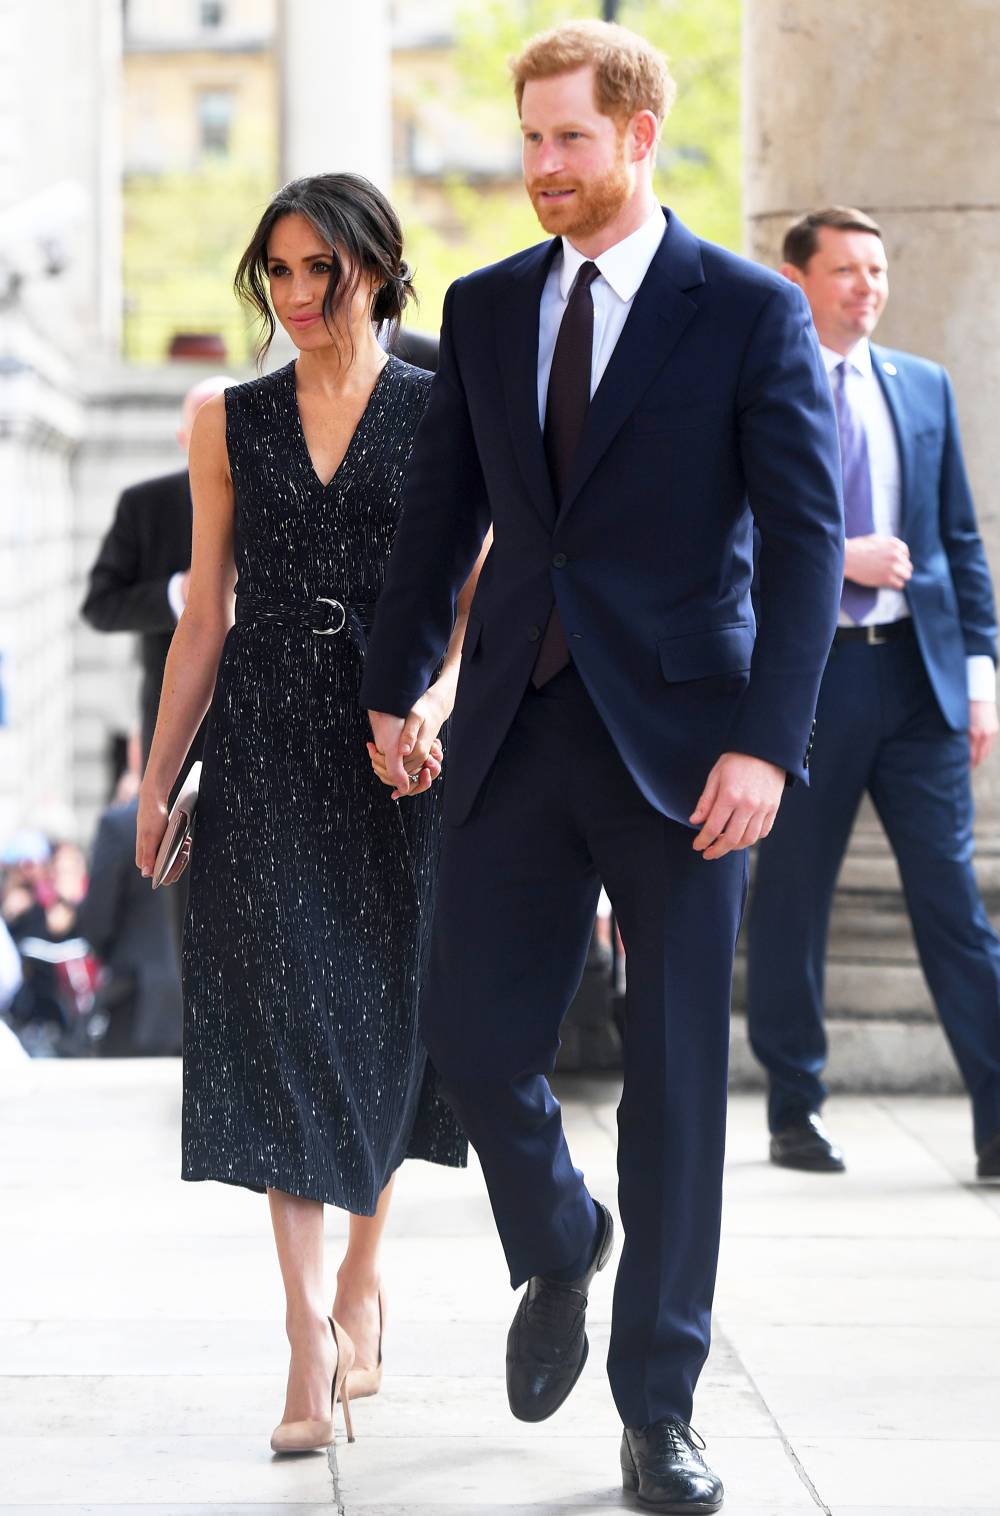 Meghan Markle and Prince Harry arrive at a memorial service at St Martin-in-the-Fields in Trafalgar Square to commemorate the 25th anniversary of the murder of Stephen Lawrence on April 23, 2018 in London, England.